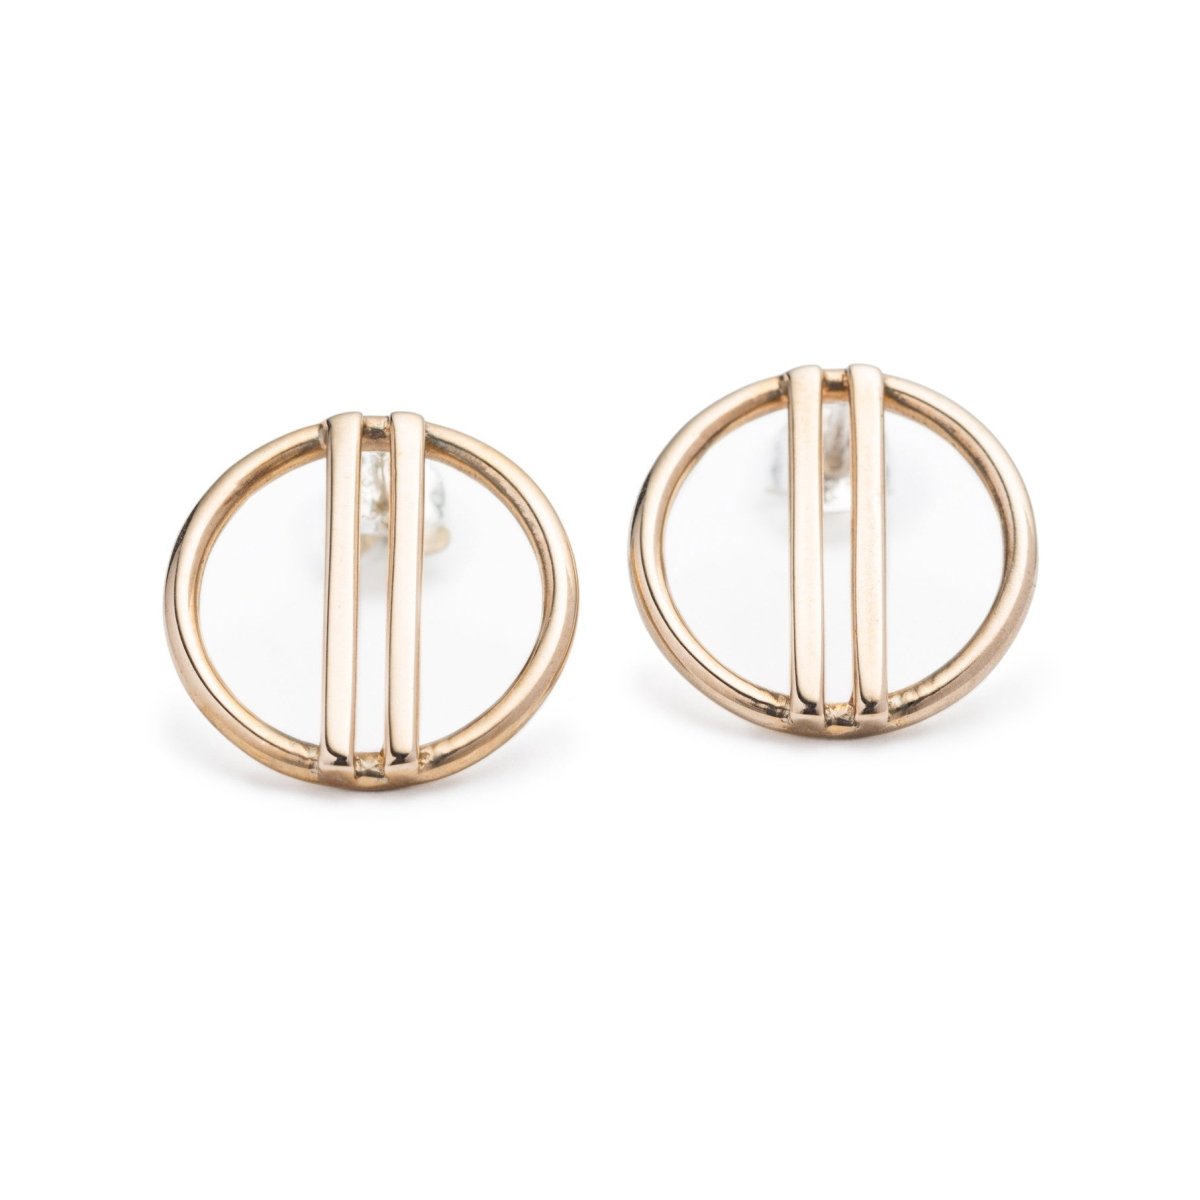 Minimal, modern, and shiny cast bronze stud earrings, featuring a small, open circle with two vertical bars running through the center. Hand-crafted in Portland, Oregon.